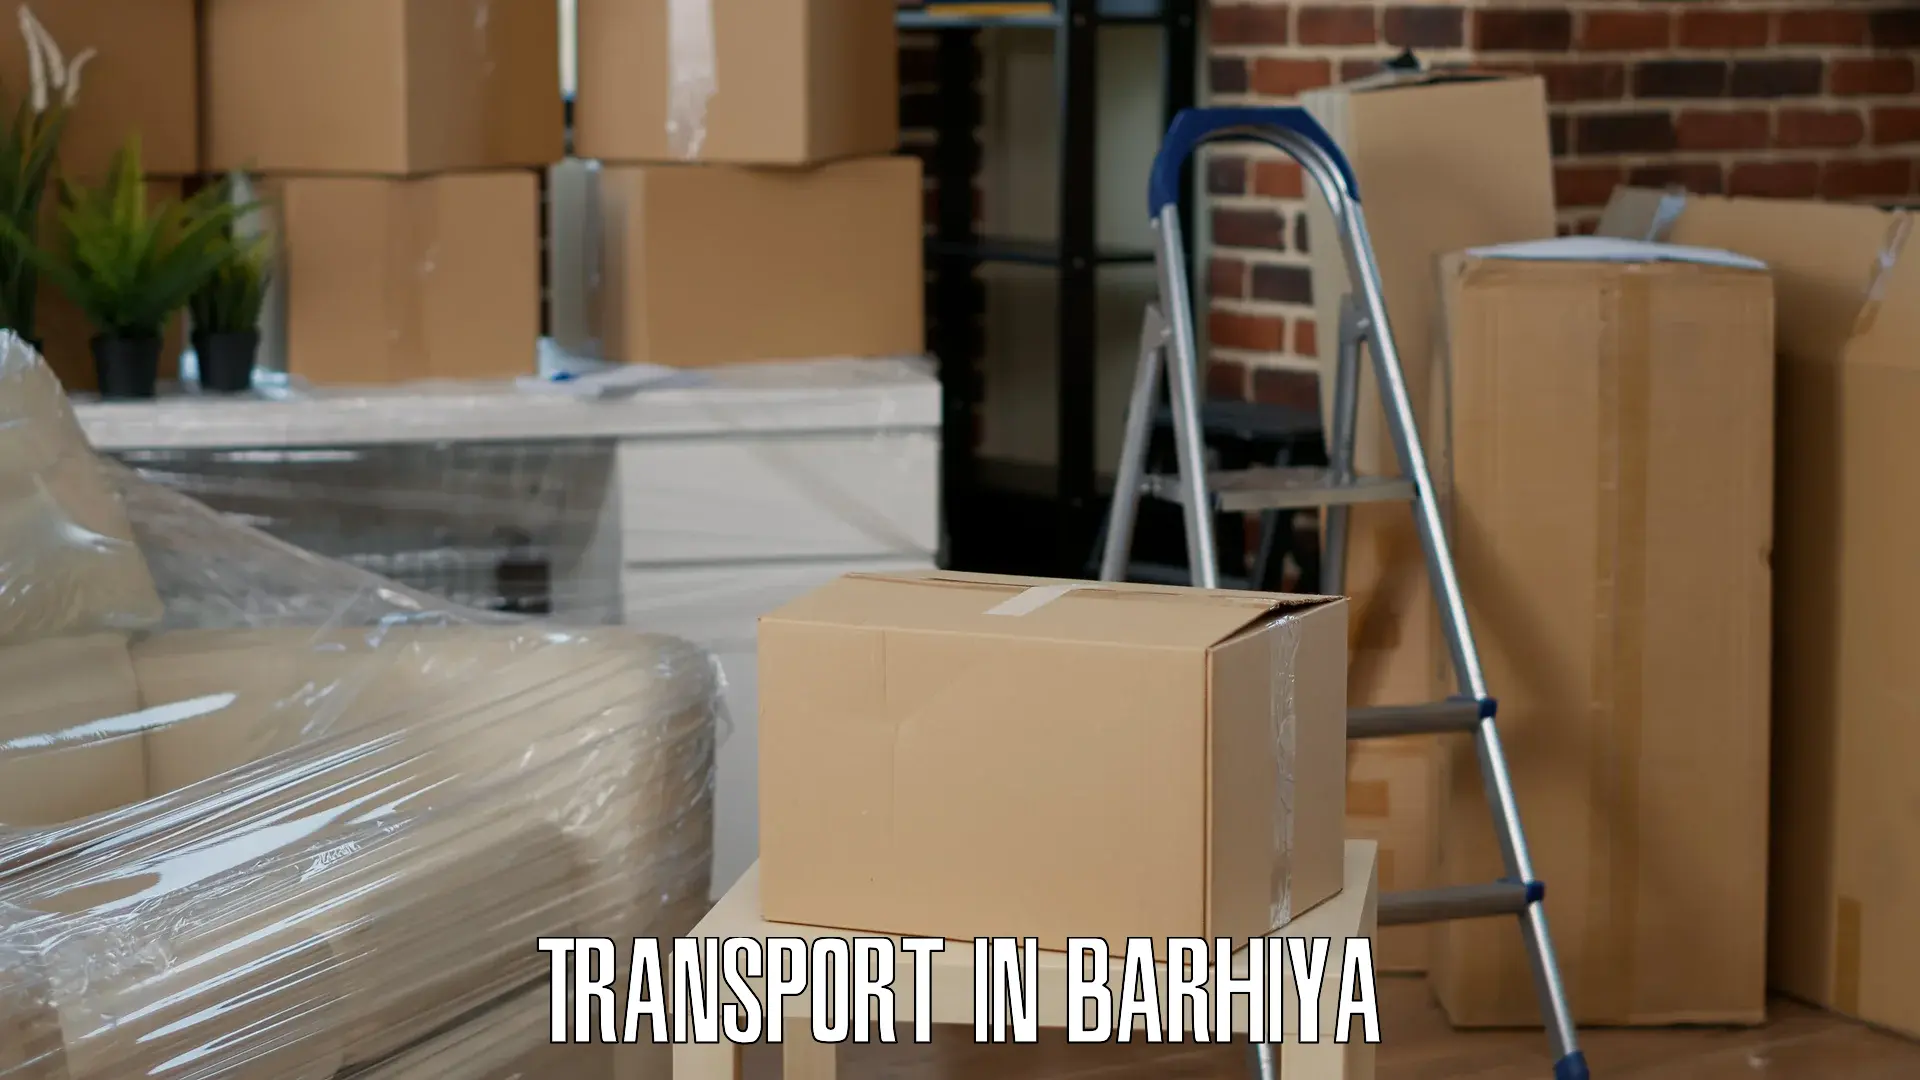 Container transport service in Barhiya